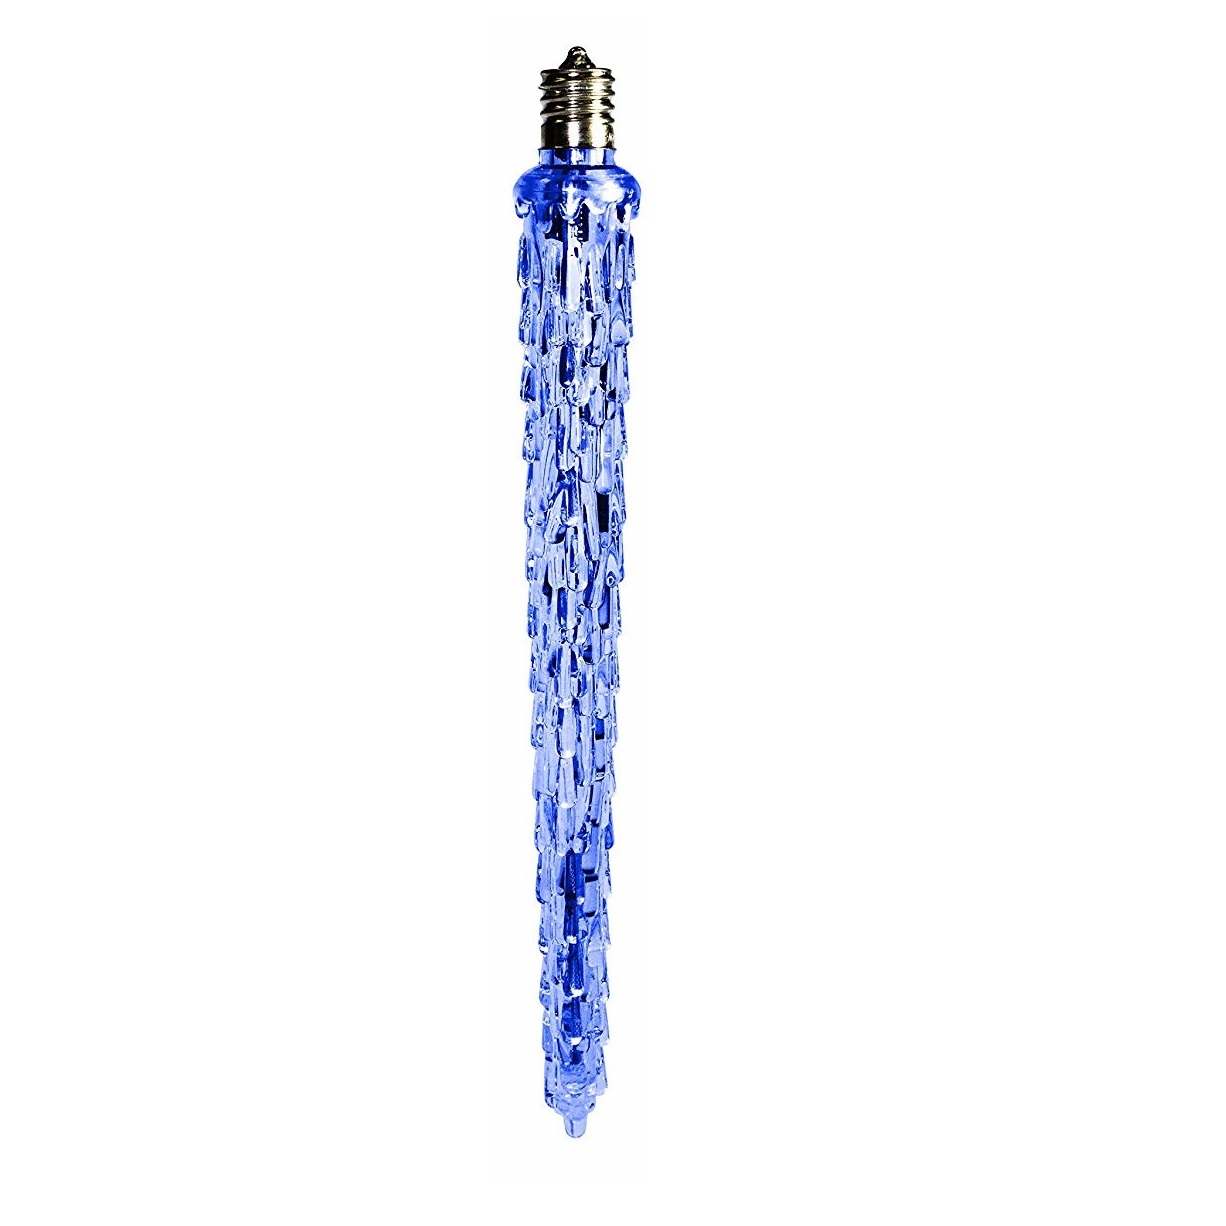 9 Inch LED C7 Steady Blue Icicle String Light Replacement Bulb